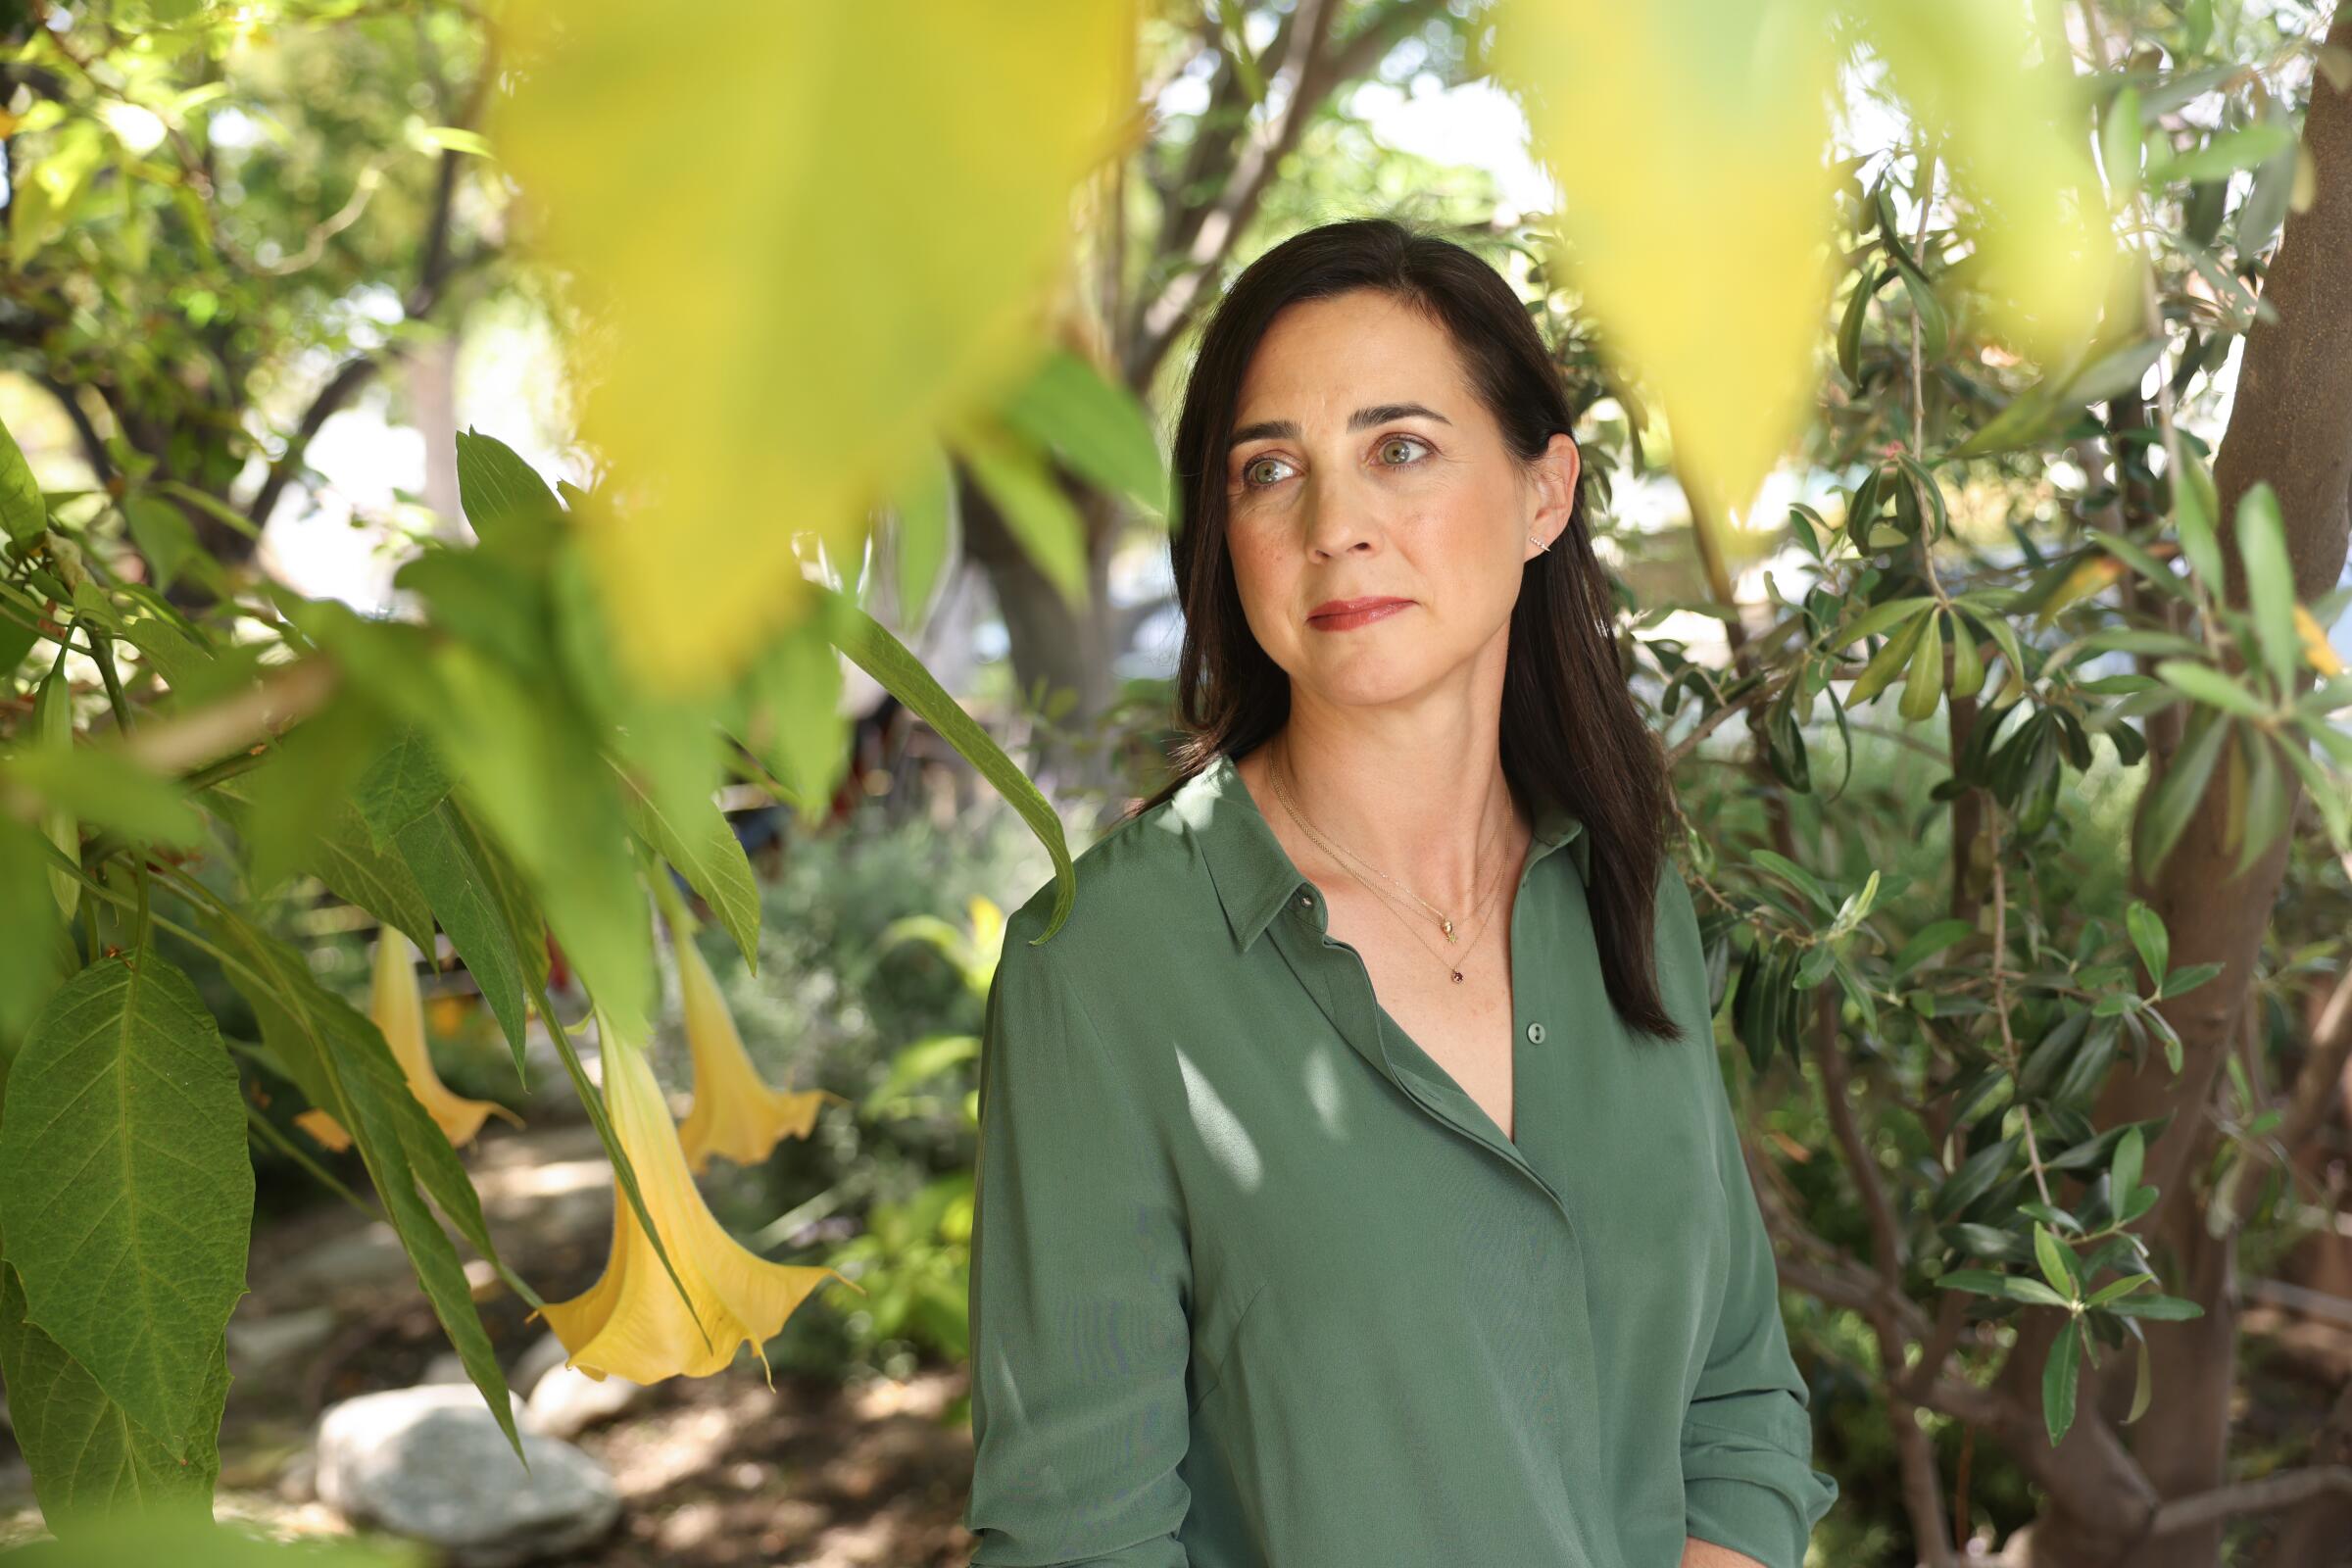 A woman in a green shirt surrounded by green leaves from nearby trees